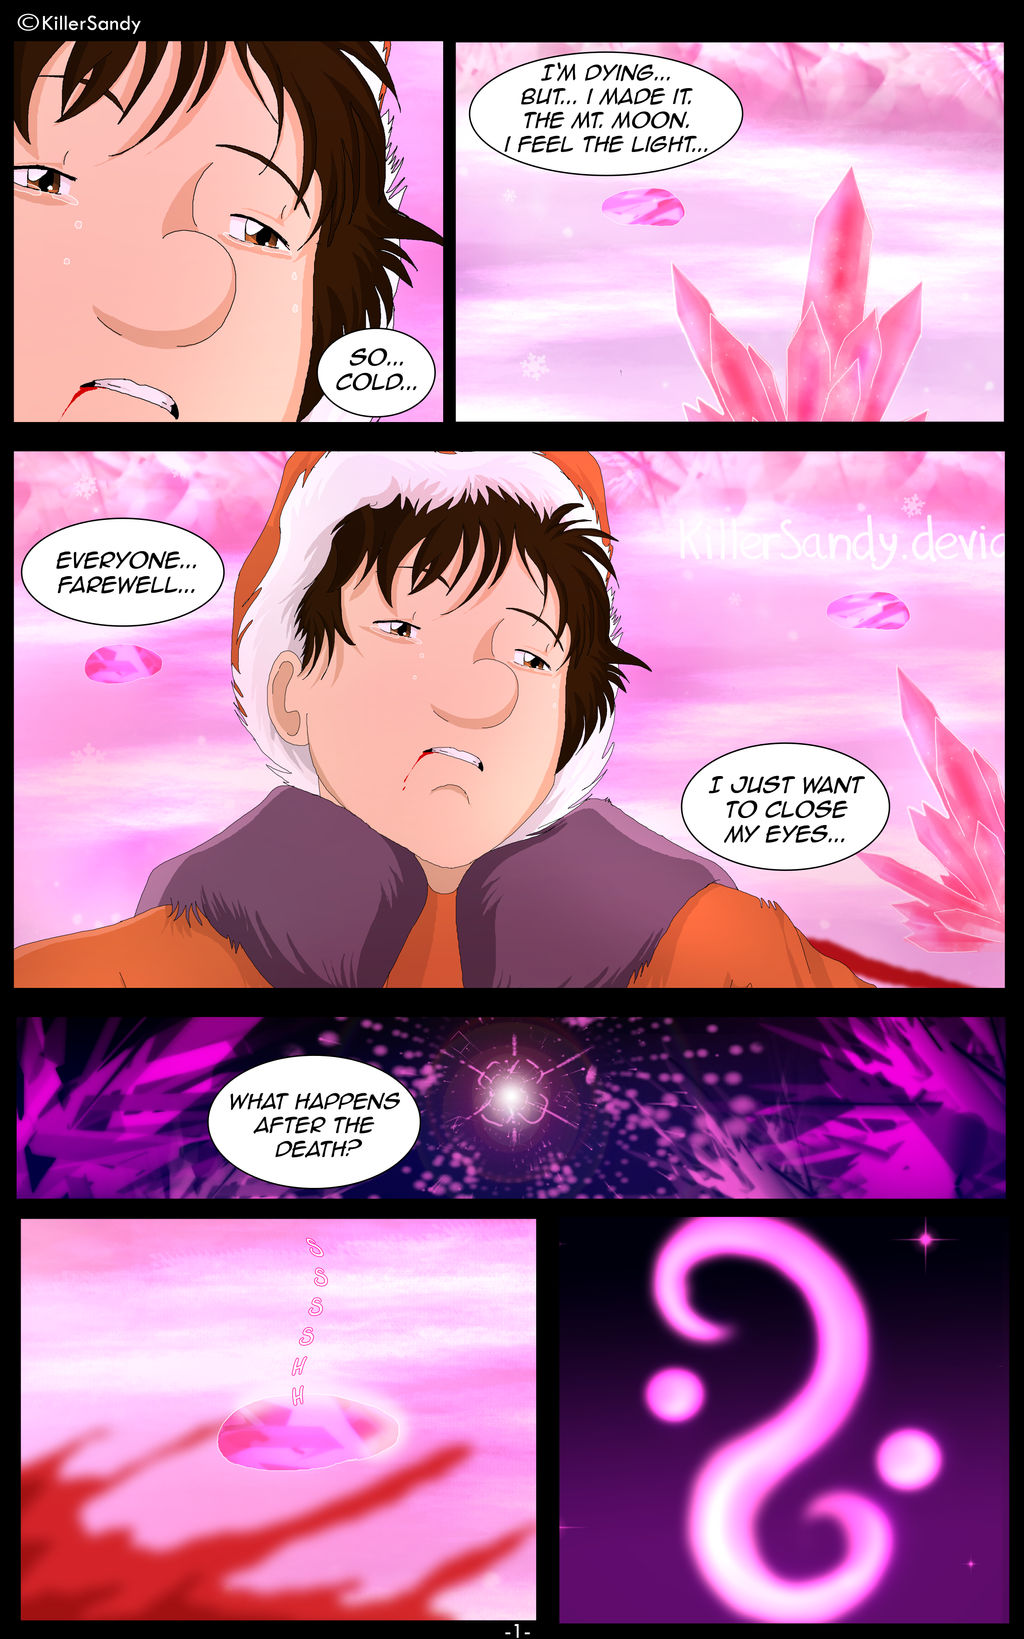 The Prince of the Moonlight Stone page 1.